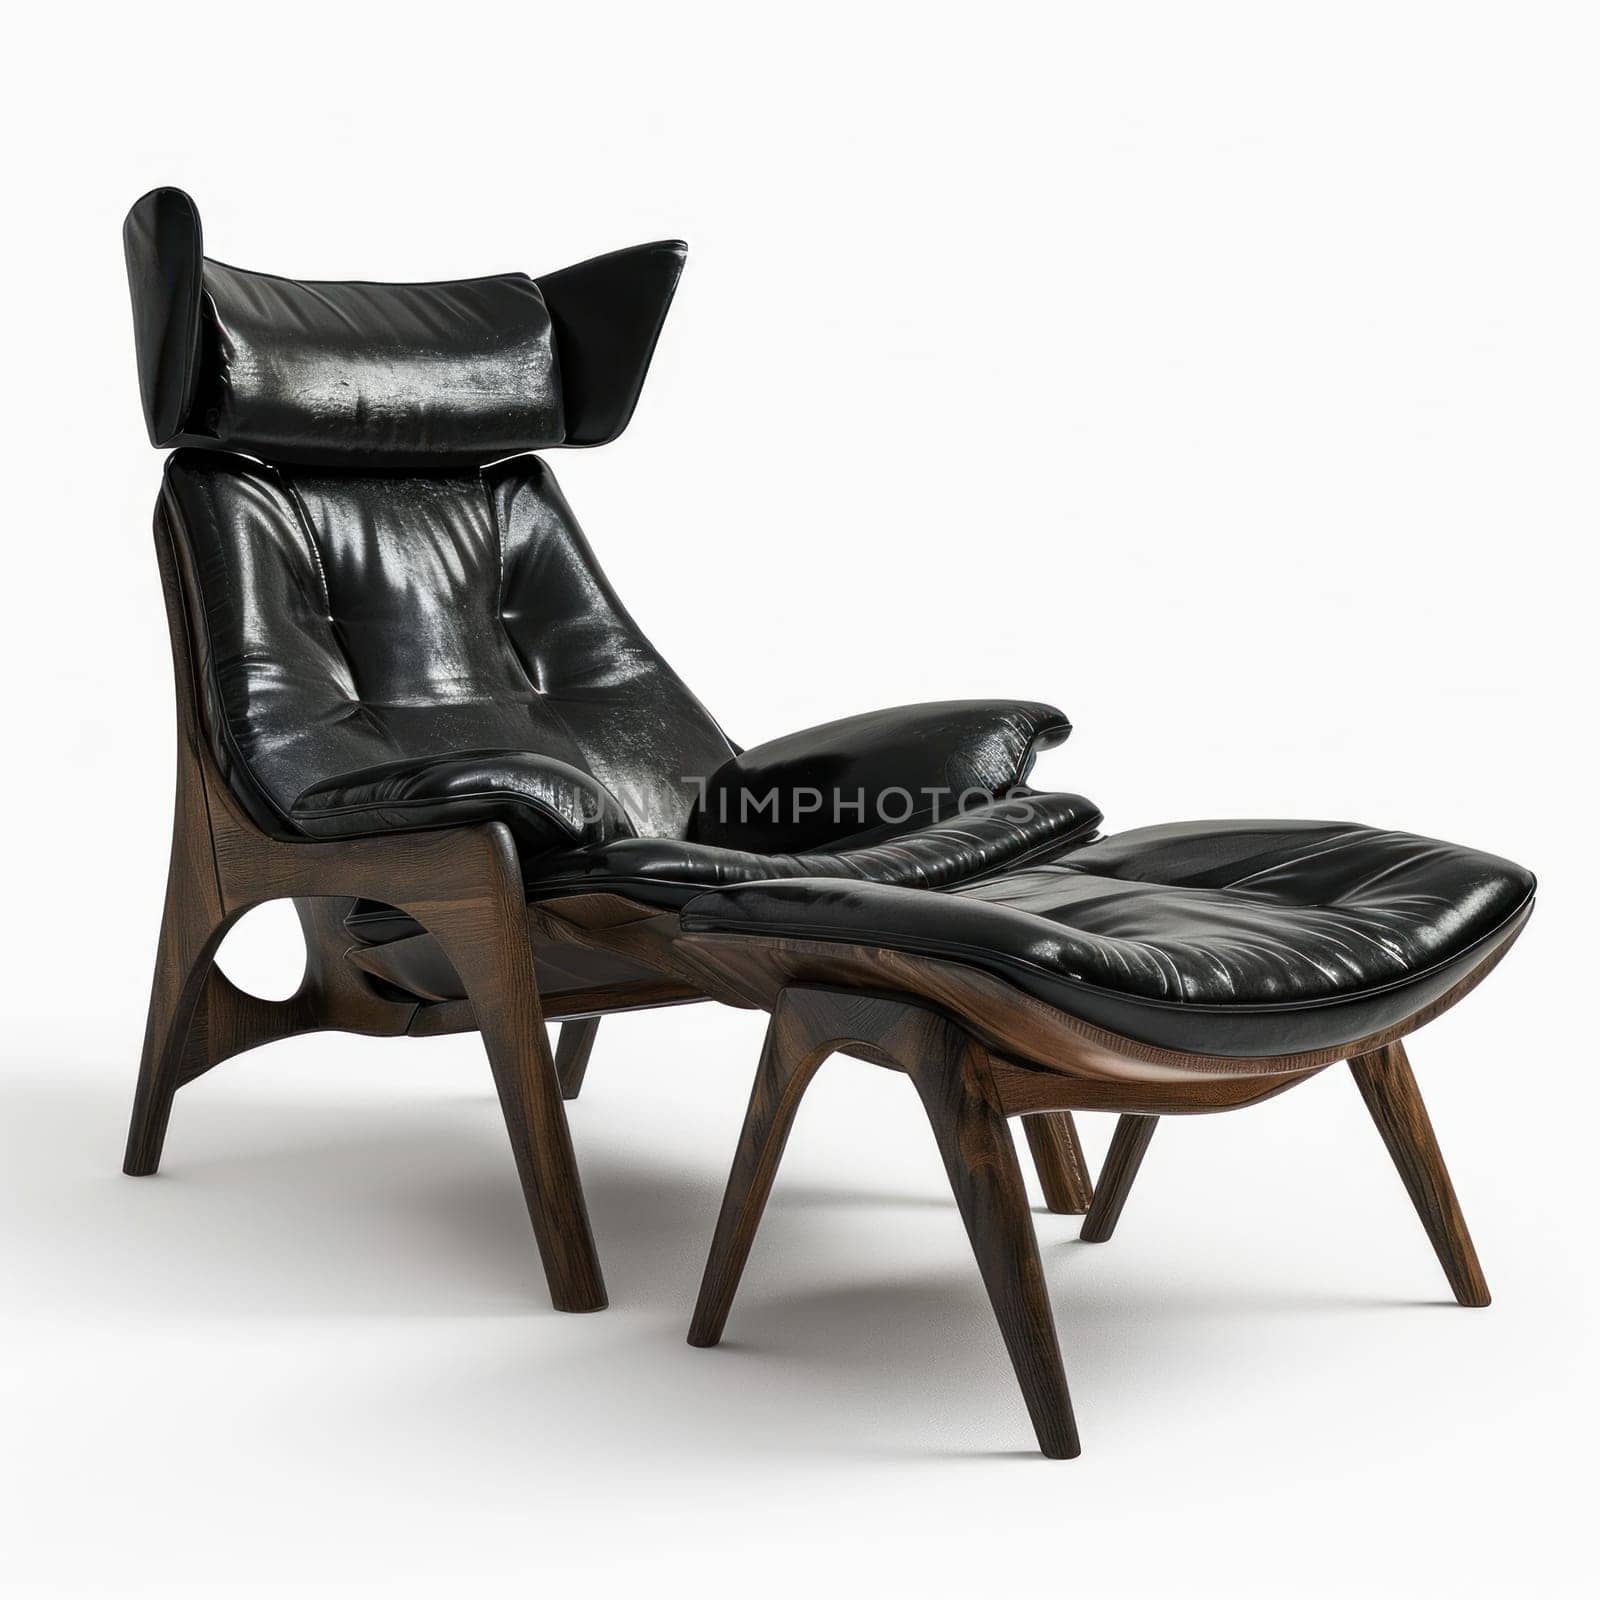 A black leather chair and ottoman with a wooden frame